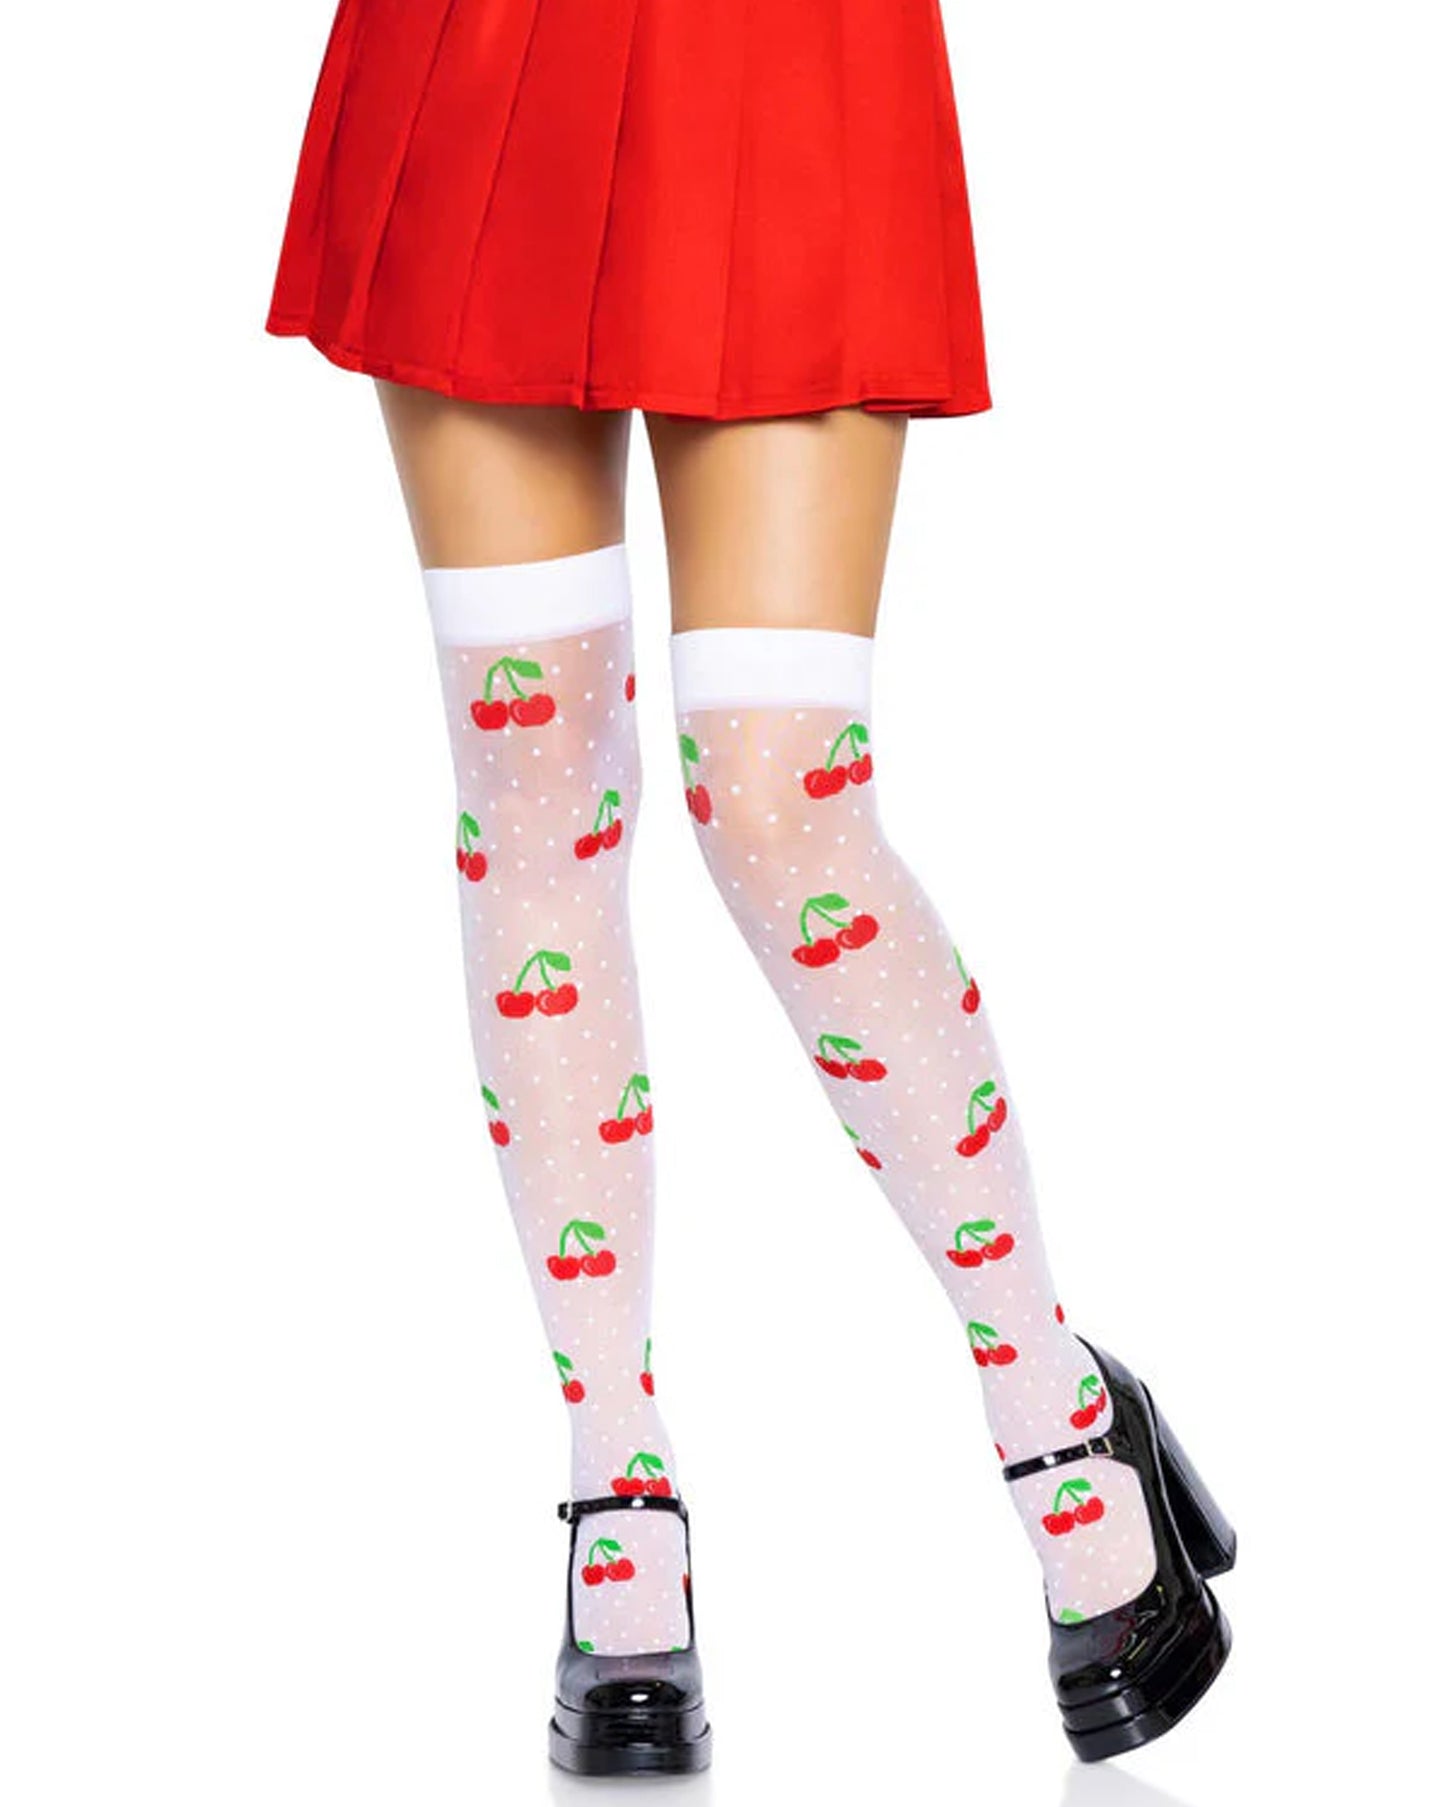 Leg Avenue 6638 Cherry Polka Dot Thigh Highs - Sheer white thigh high socks / stockings with a small spot and red cherries with green leaves and stems pattern and plain elasticated cuff. Worn with a red pleated skirt and patent black mary jane shoes.